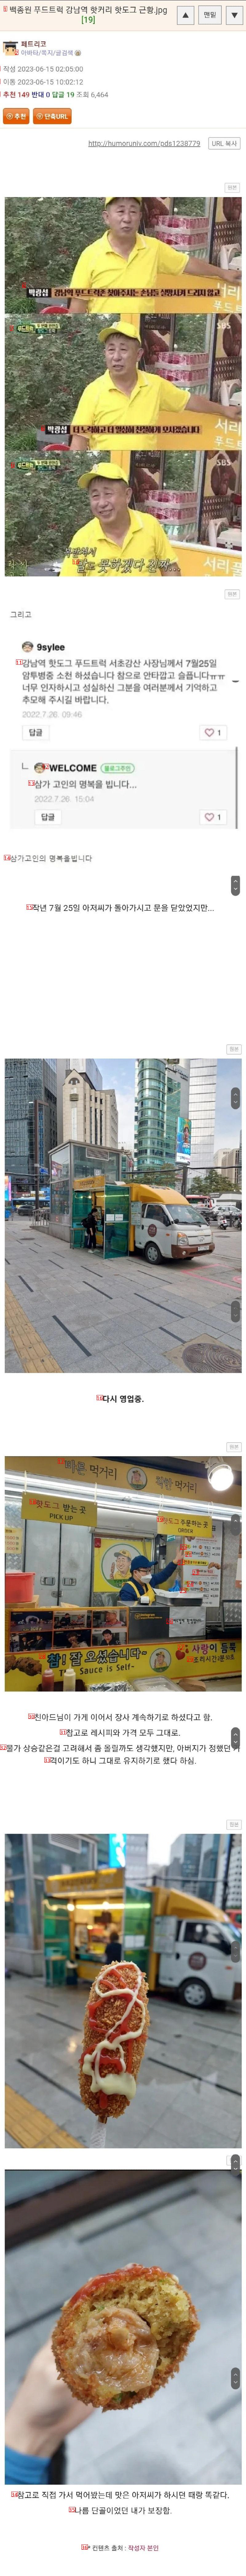 The update of the hot dog at Gangnam Station, a food truck in Jongwon Baek, where the obituary news was reported